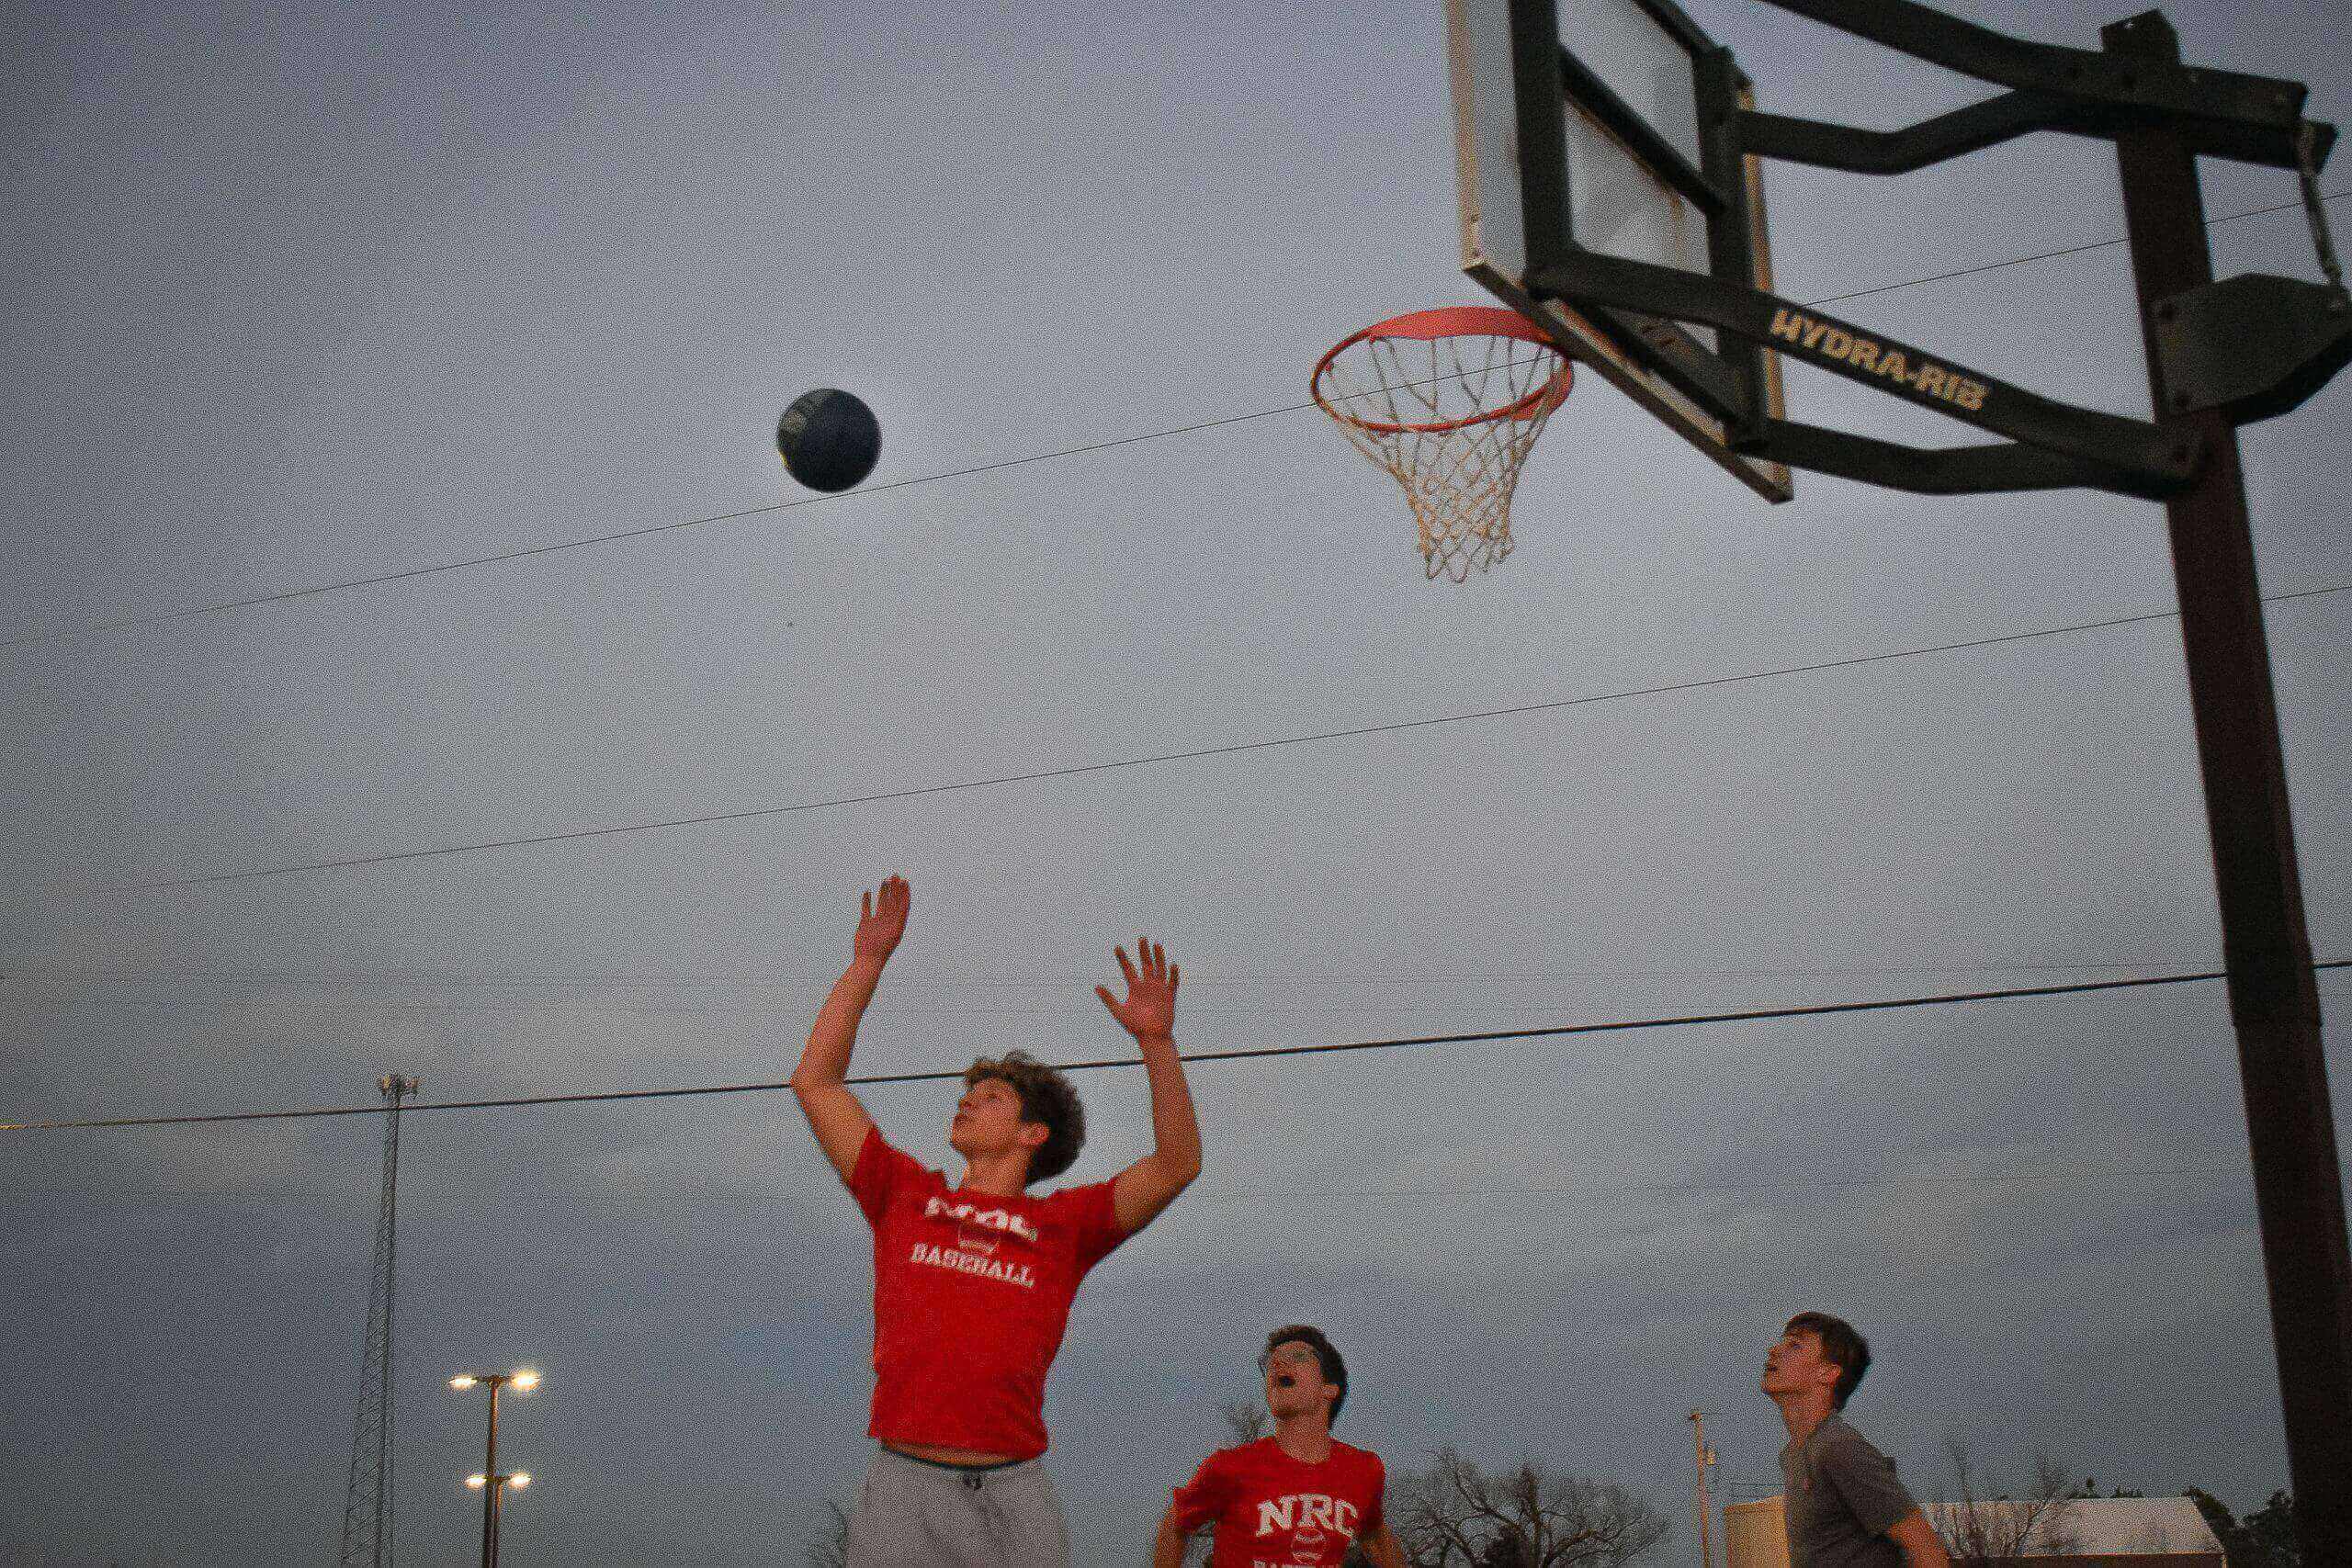 Three individuals playing basketball outdoors, one of whom is jumping to shoot the ball towards the hoop.